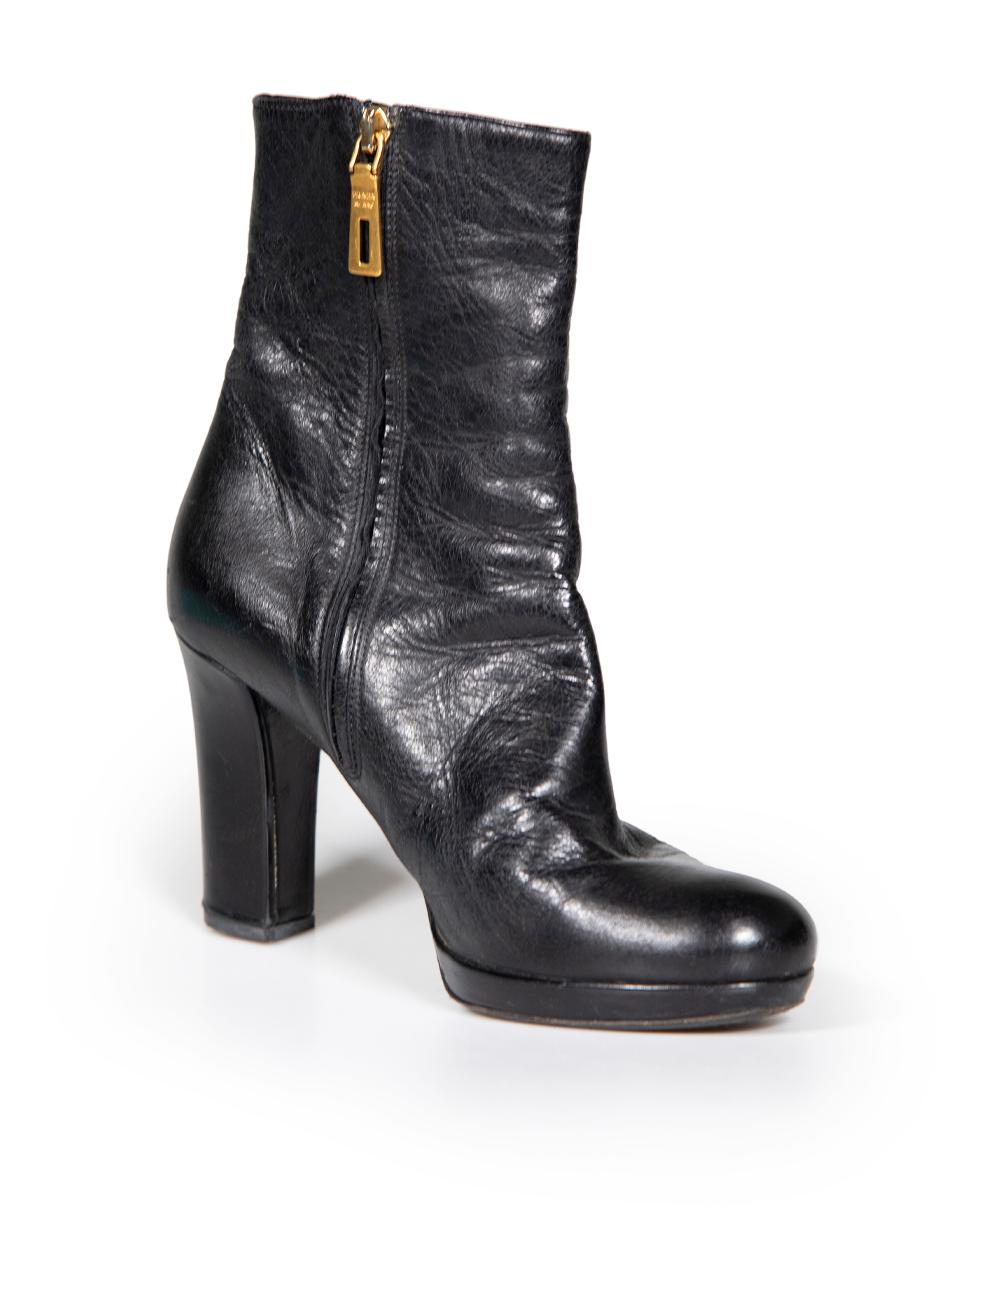 CONDITION is Very good. Minimal wear to boots is evident. Minimal creasing to the overall leather and slight abrasion to back of both heel. A black paint mark can be seen to the zip of right shoe on this used Prada designer resale item. These shoes